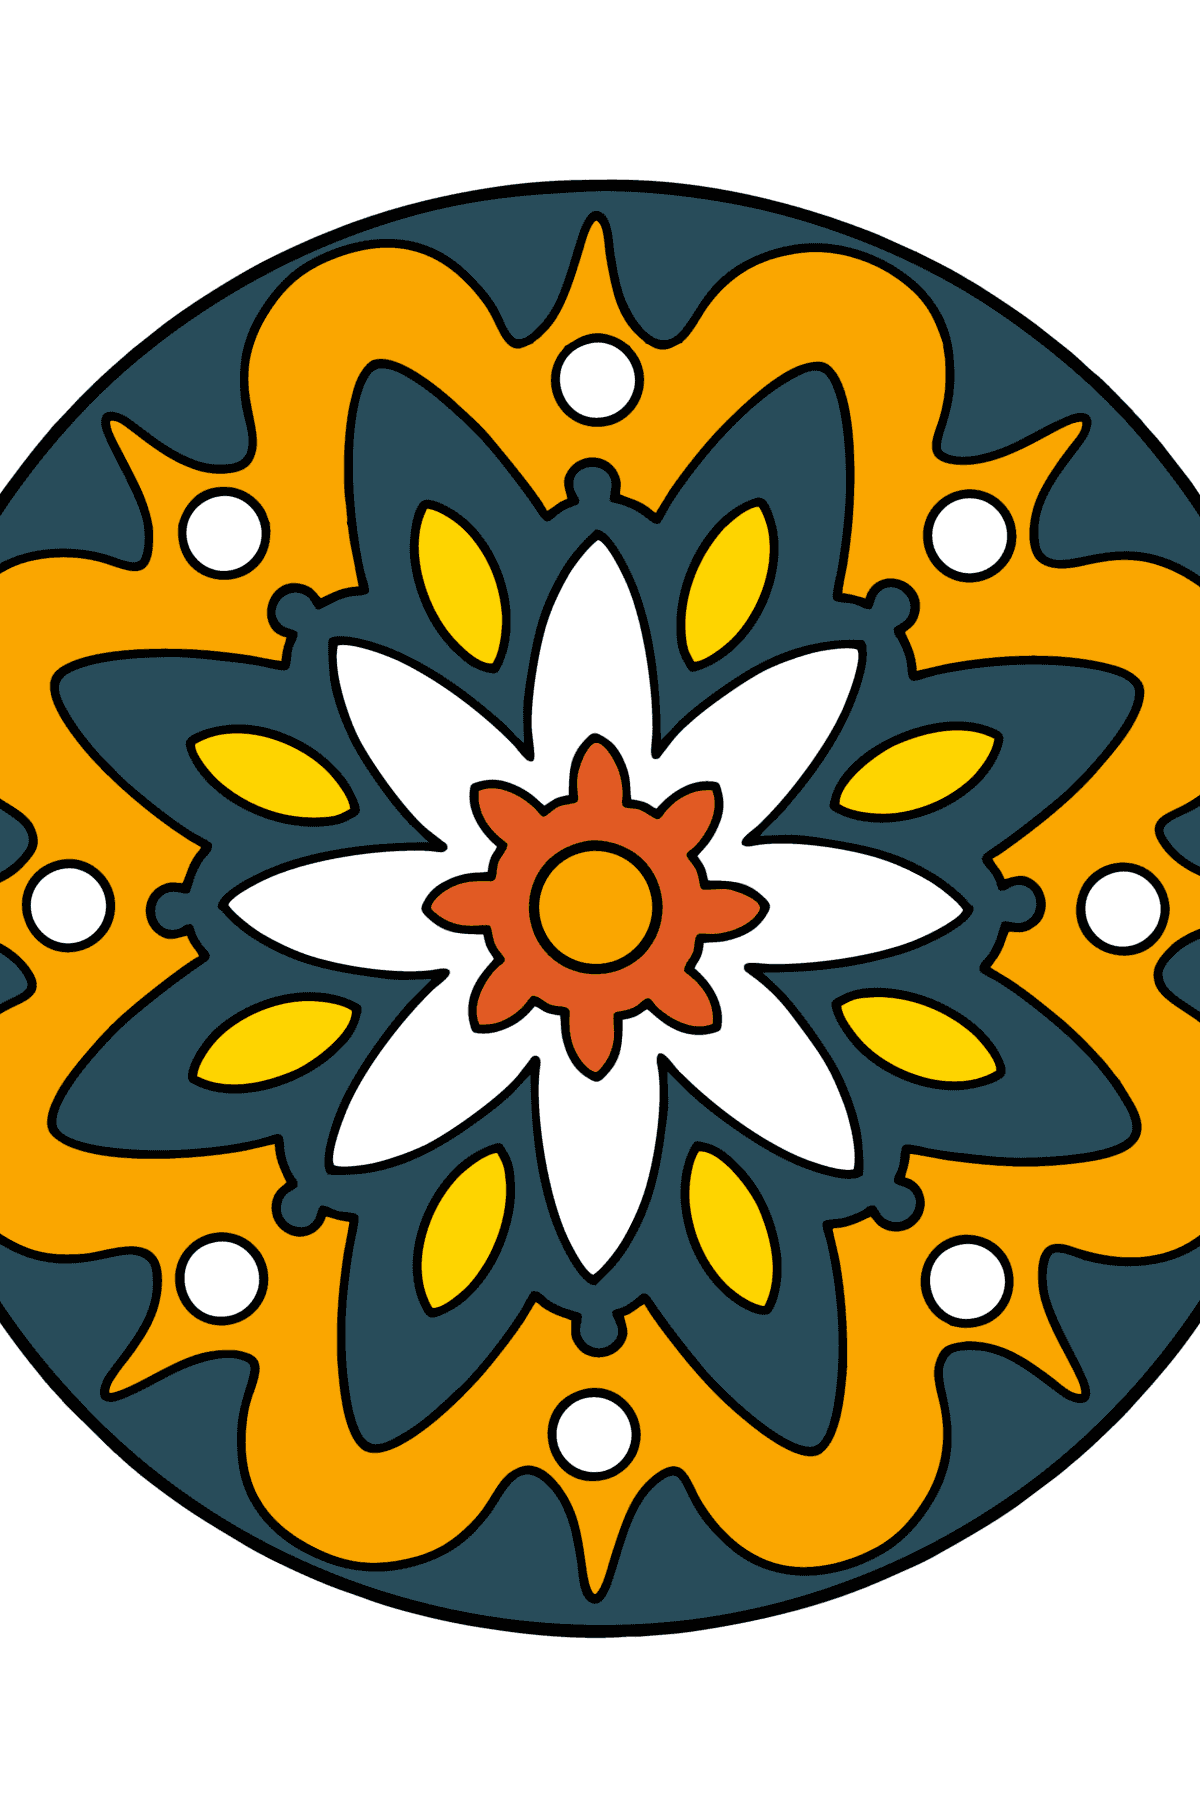 Mandala coloring page - 22 elements - Coloring Pages for Kids